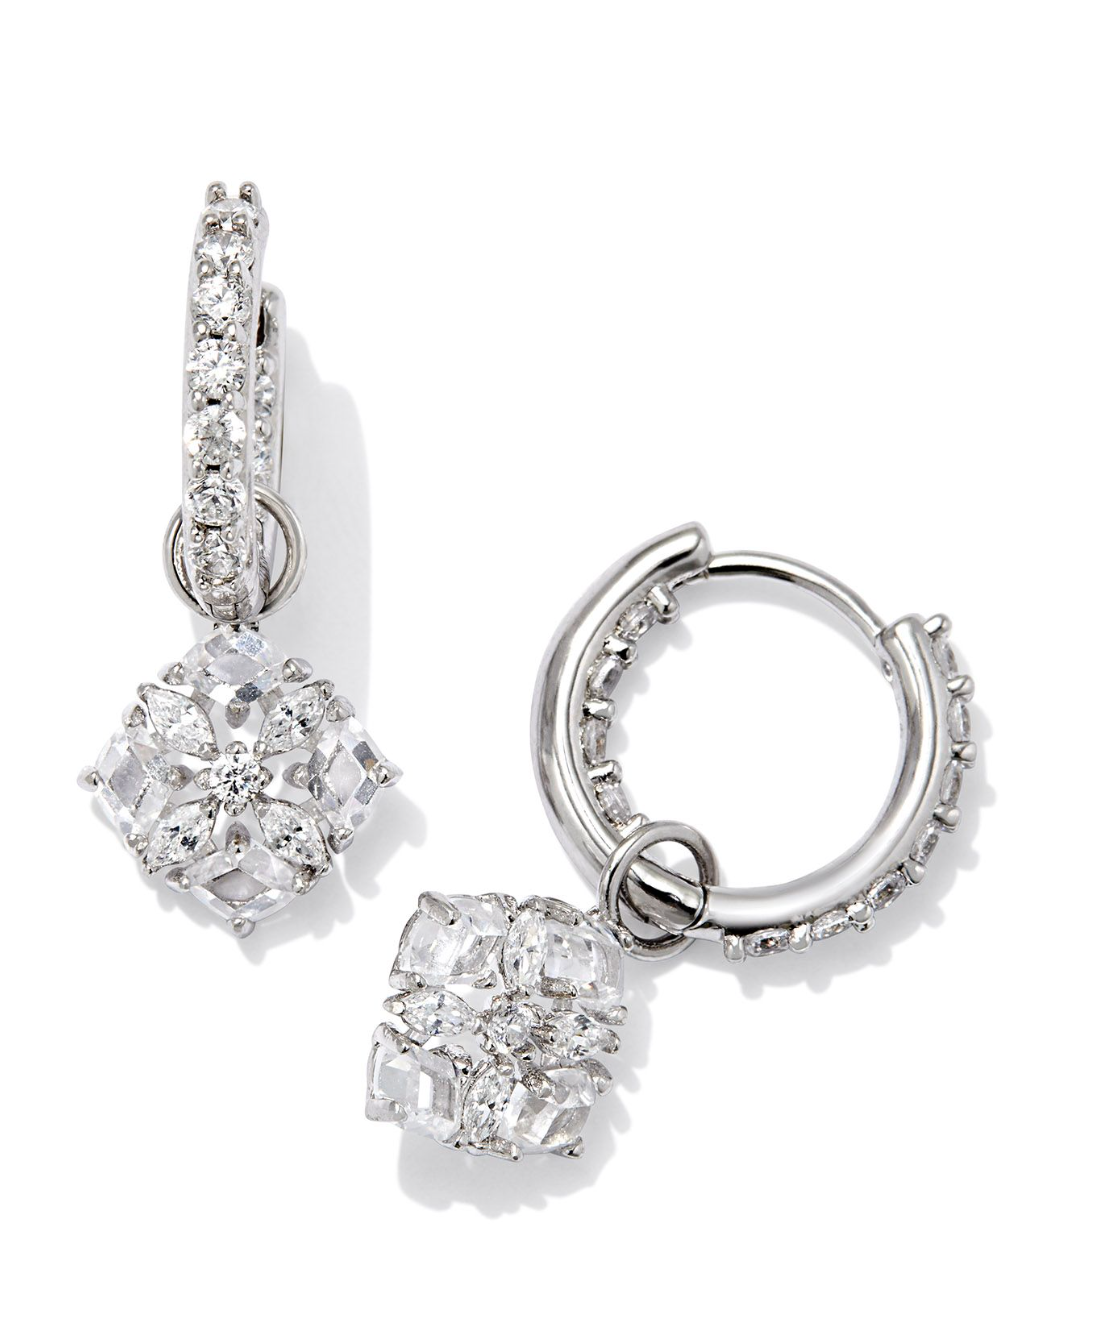 Dira Convertible Silver Huggie Earrings in White Crystal | KENDRA SCOTT - The Street Boutique 